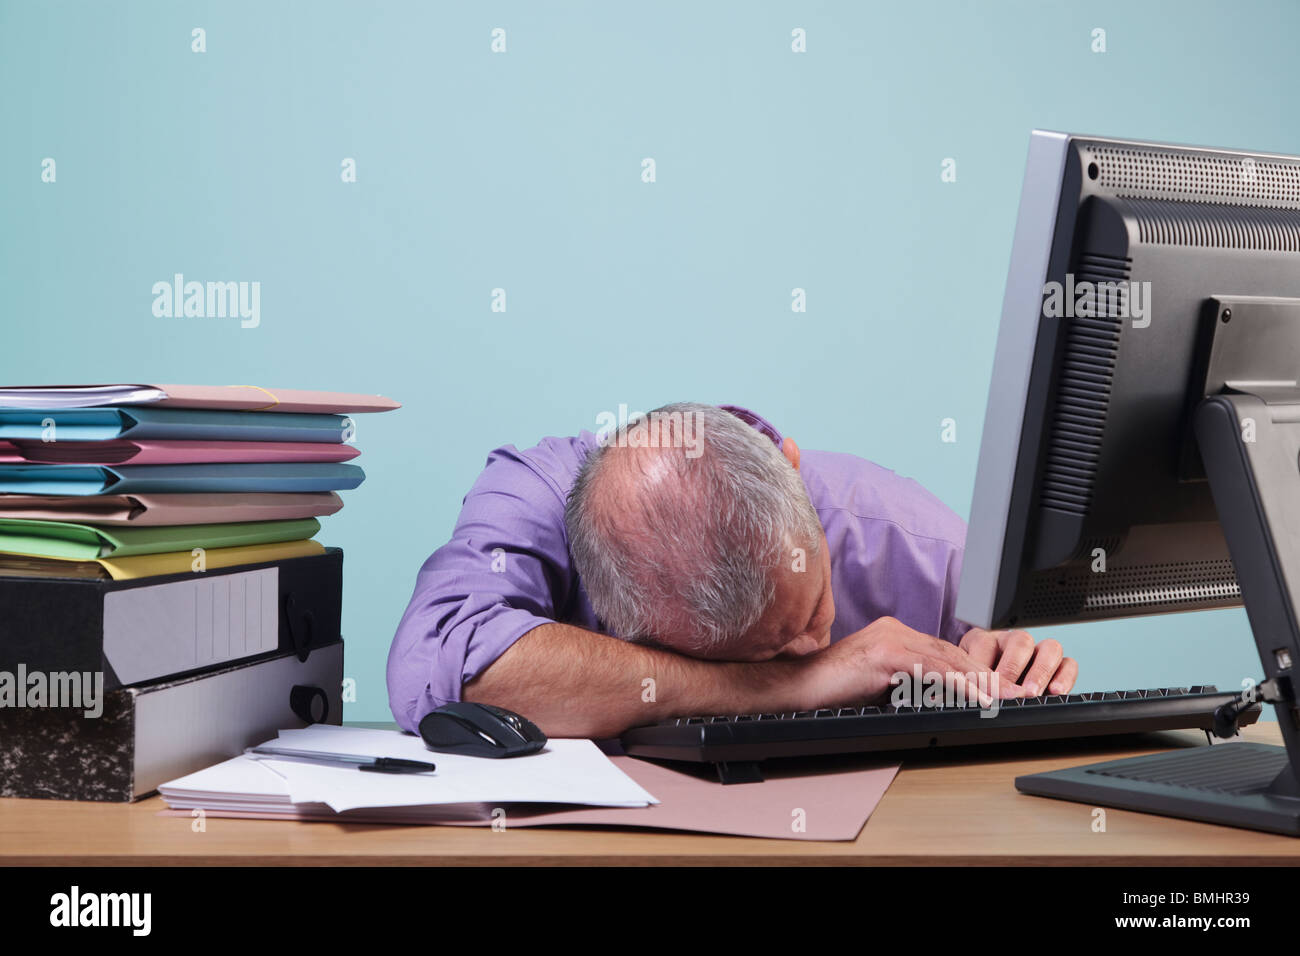 Overworked Man Sleeping At His Desk Stock Photo 29894797 Alamy